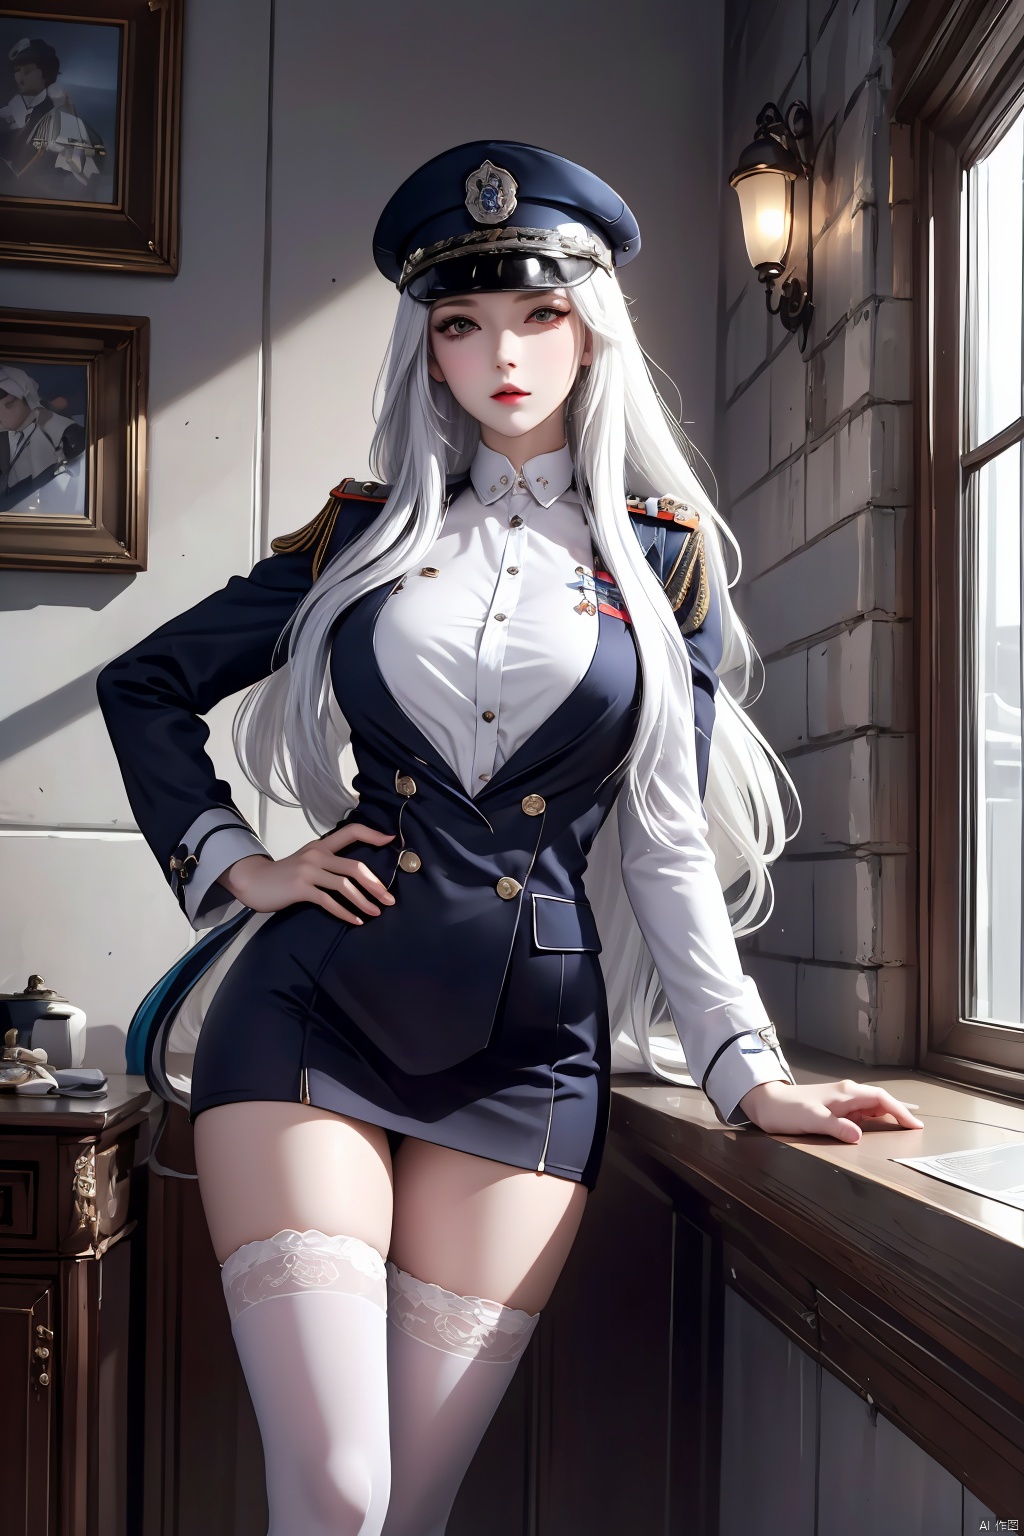 Cover Girl,Military uniforms,hat,badges, long hair, white hair,1 girl,duotone black and white,sunglasses,Gem,Black stockings, legs, newspaper background wall, bsx<lora:EMS-263174-EMS:0.800000>